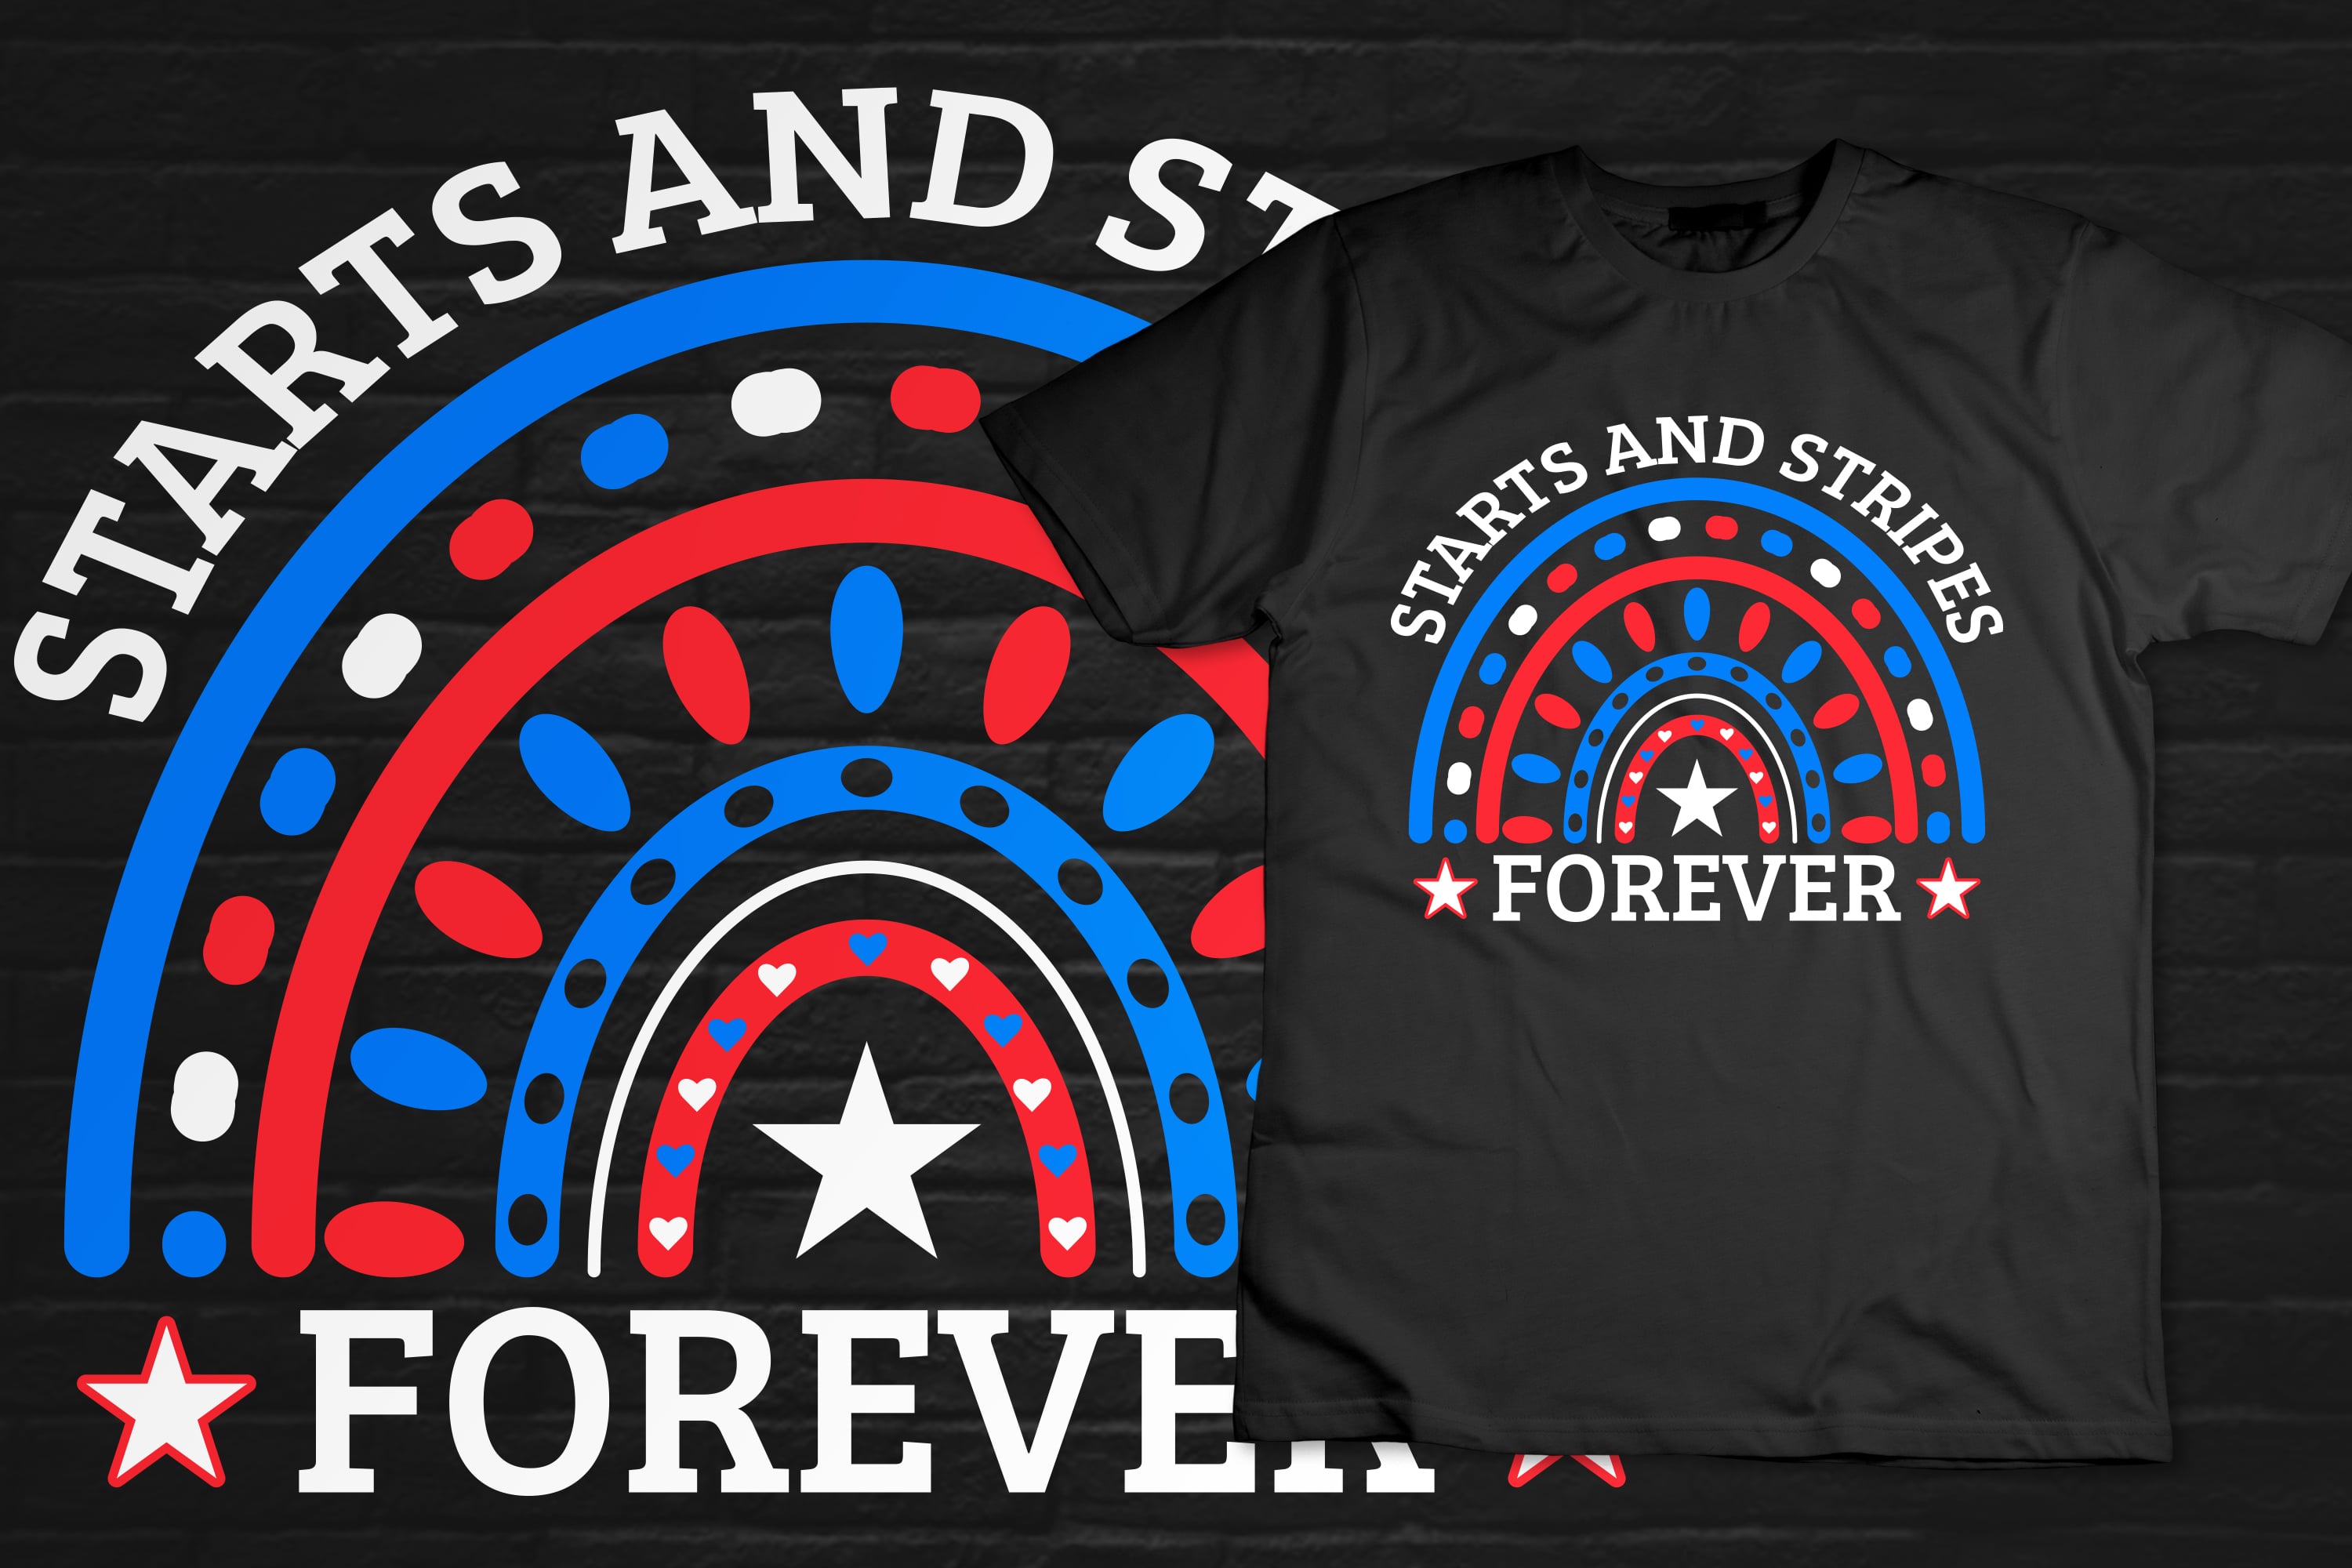 T - shirt that says stars and stripes forever.